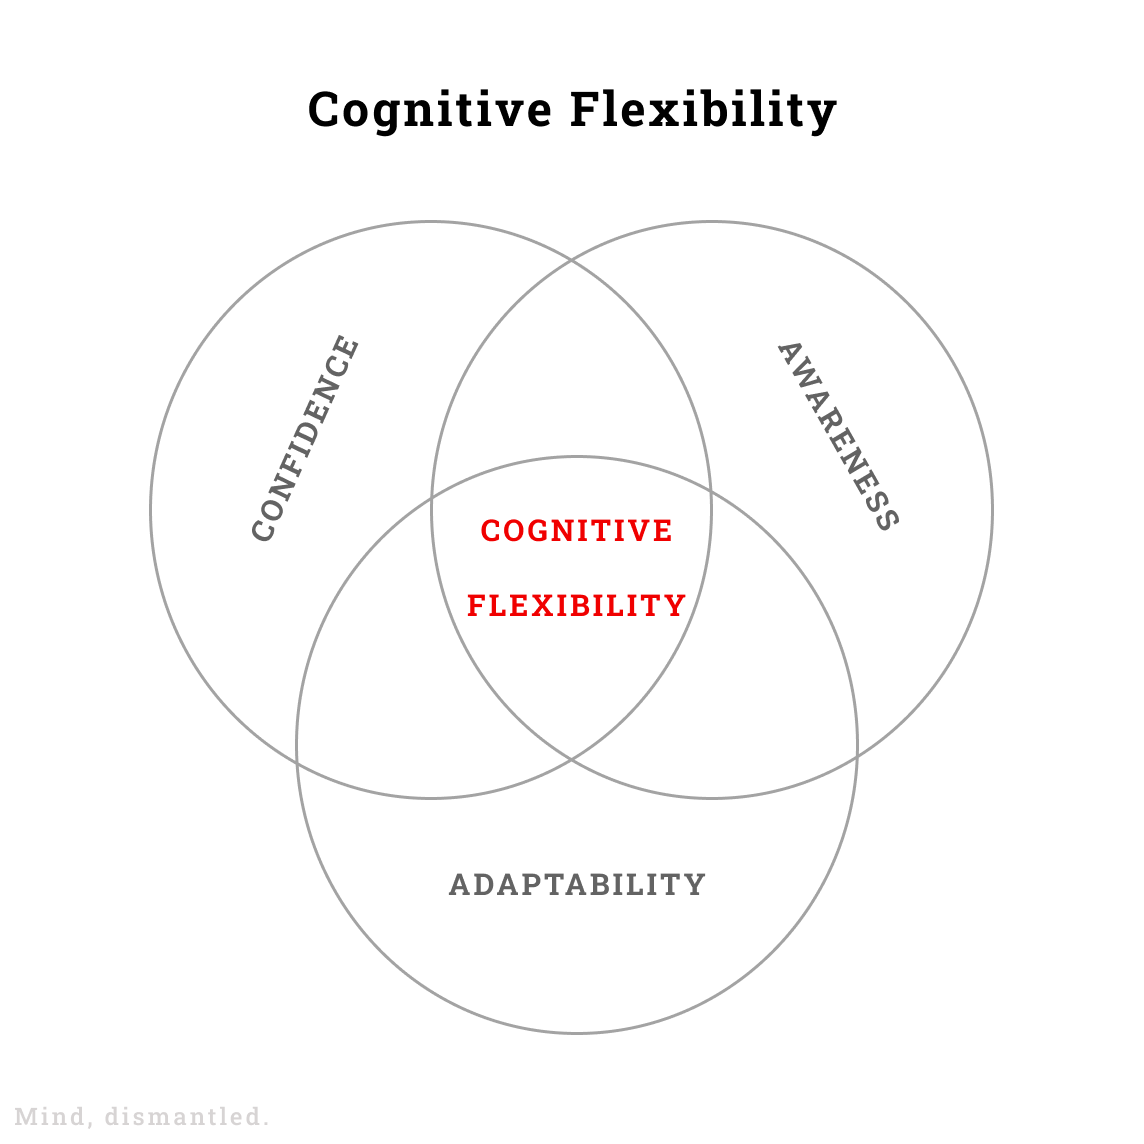 Cognitive Flexibility sits at the interaction of Awareness, Confidence and Adaptability